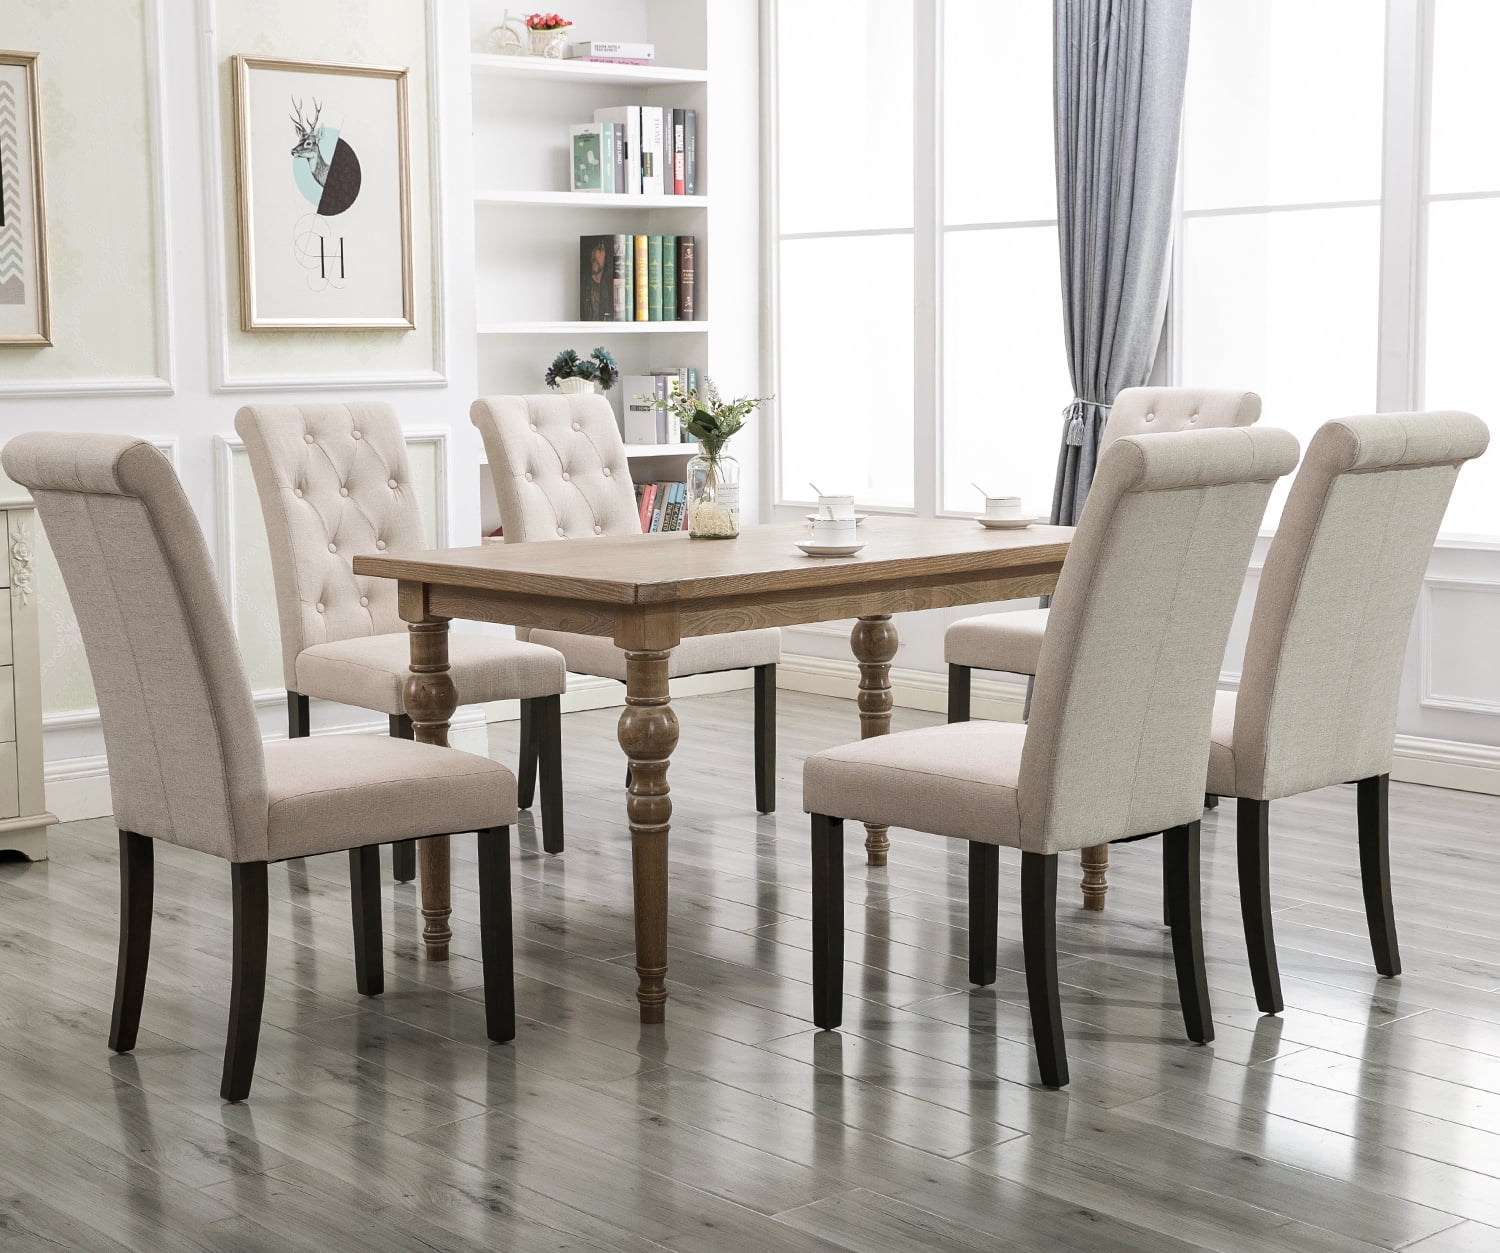 Clearance! Tufted Linen Dining Chairs with High Back and Solid Wood ...